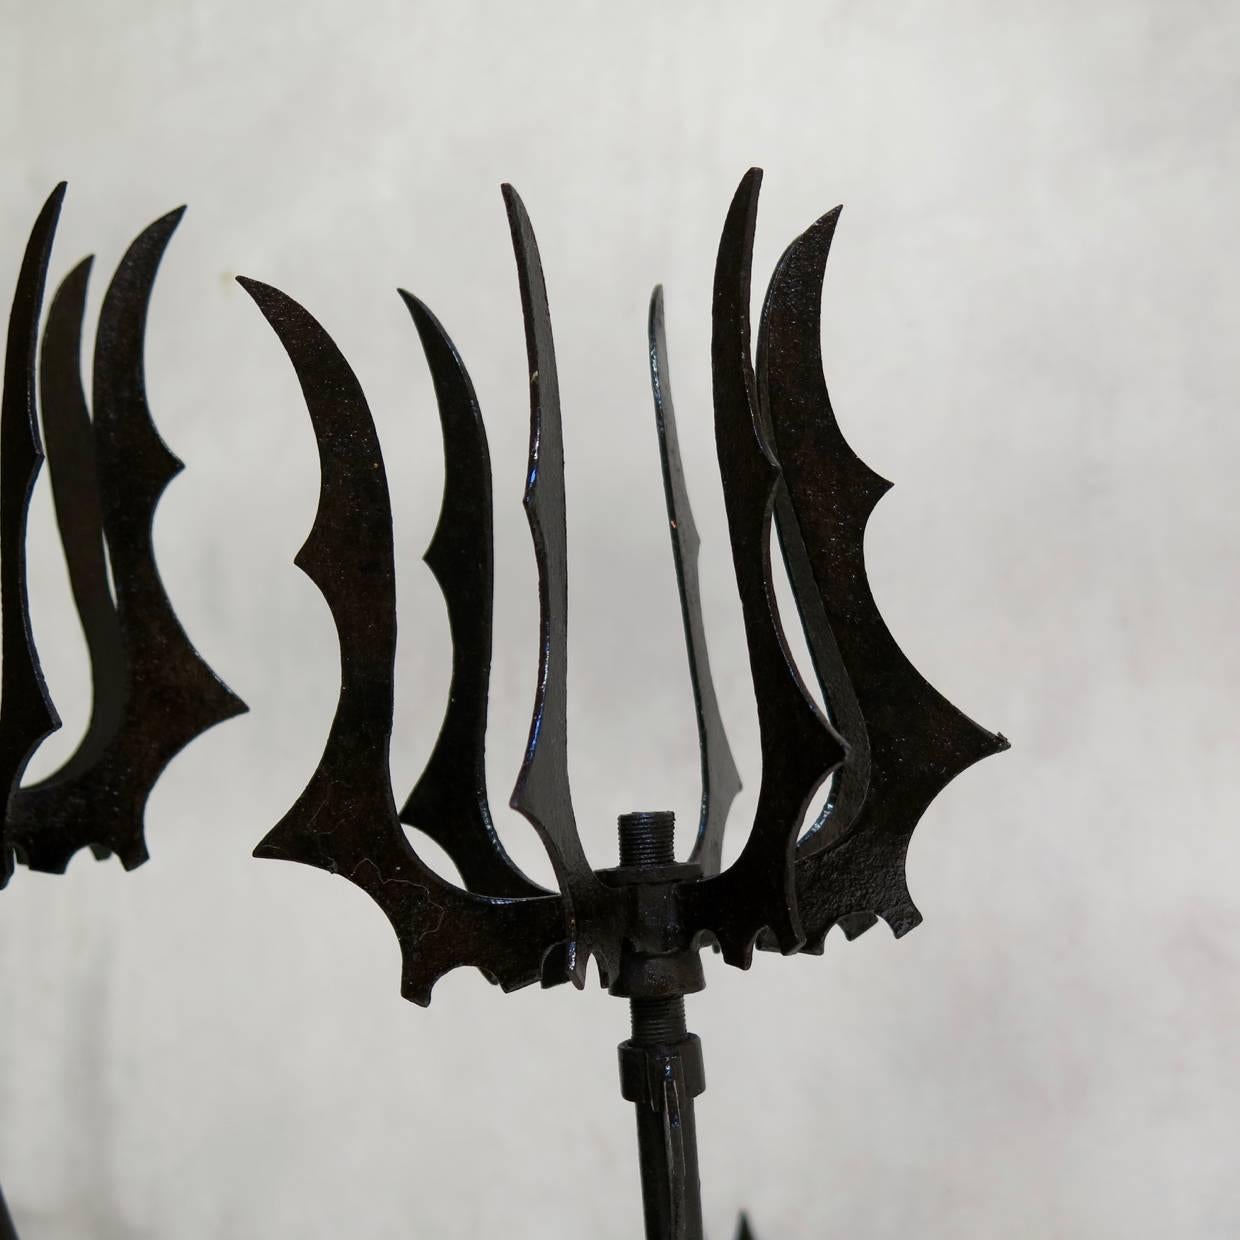 French Set of Four Neo-Gothic Iron Sconces, France, 1940s For Sale